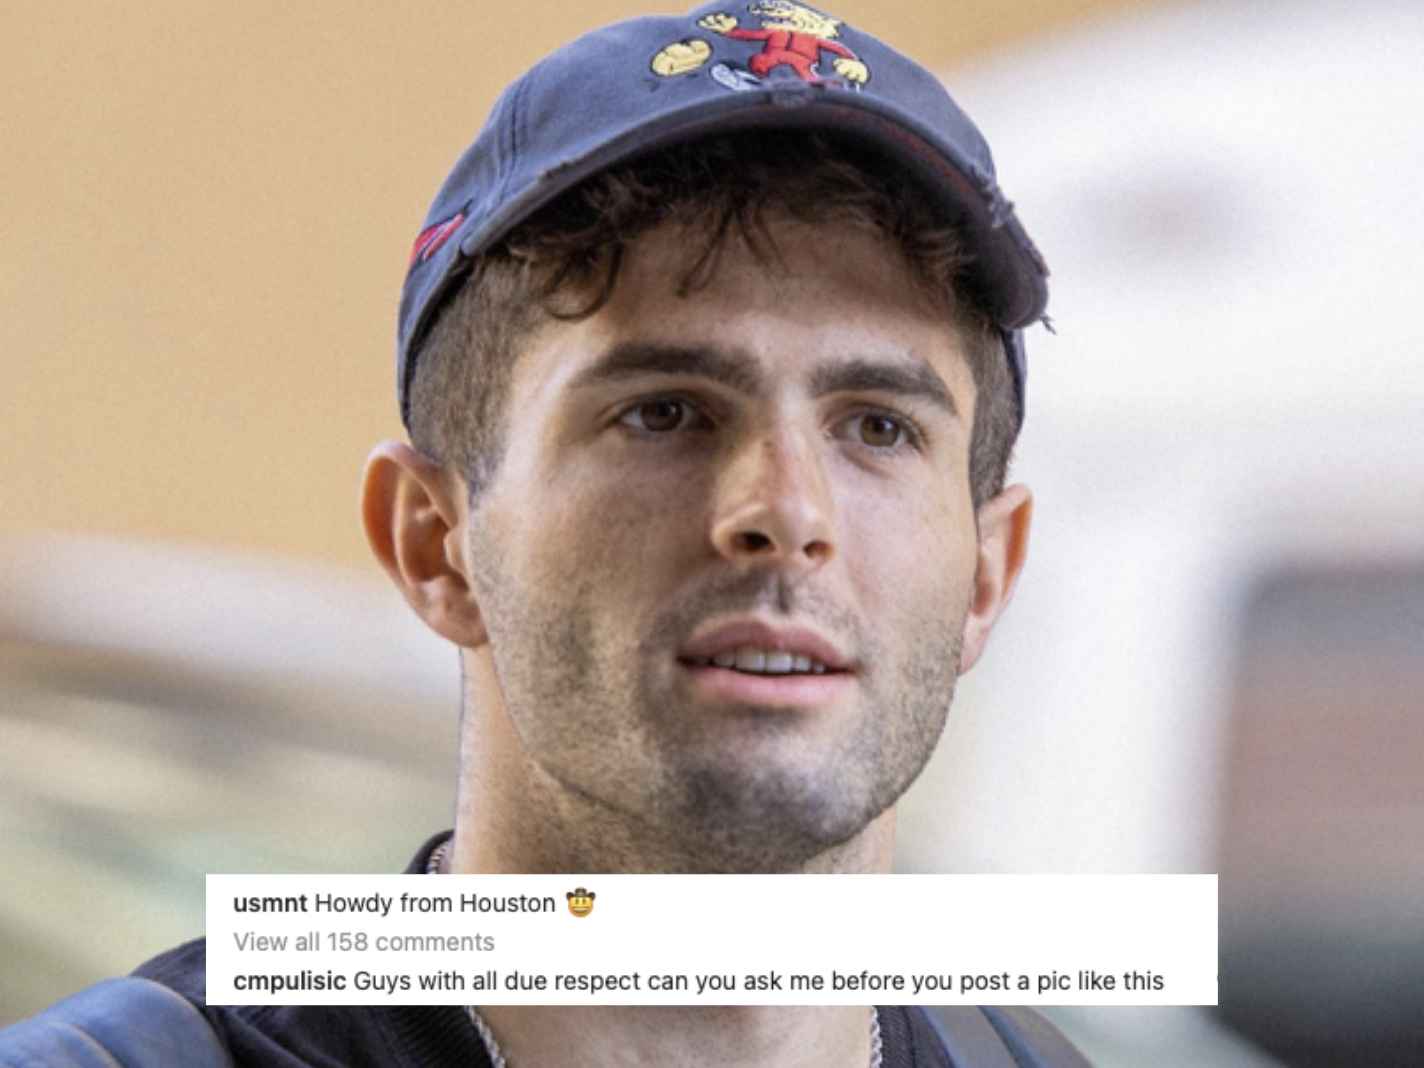 Christian Pulisic not amused by Instagram admin posting his photo on official USMNT account